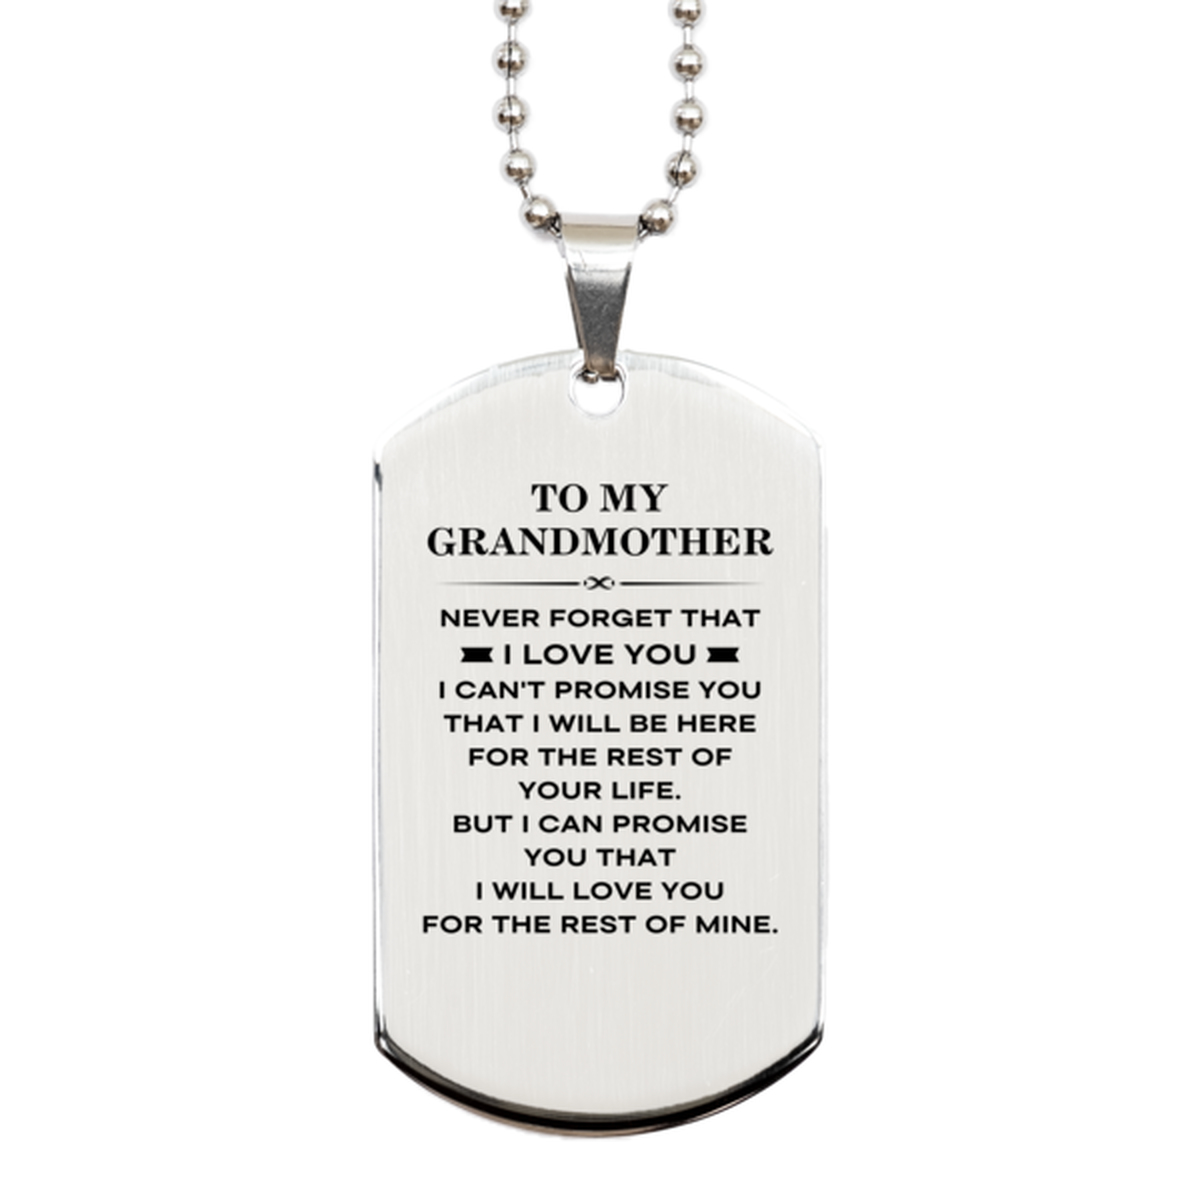 To My Grandmother Gifts, I will love you for the rest of mine, Love Grandmother Dog Tag Necklace, Birthday Christmas Unique Silver Dog Tag For Grandmother